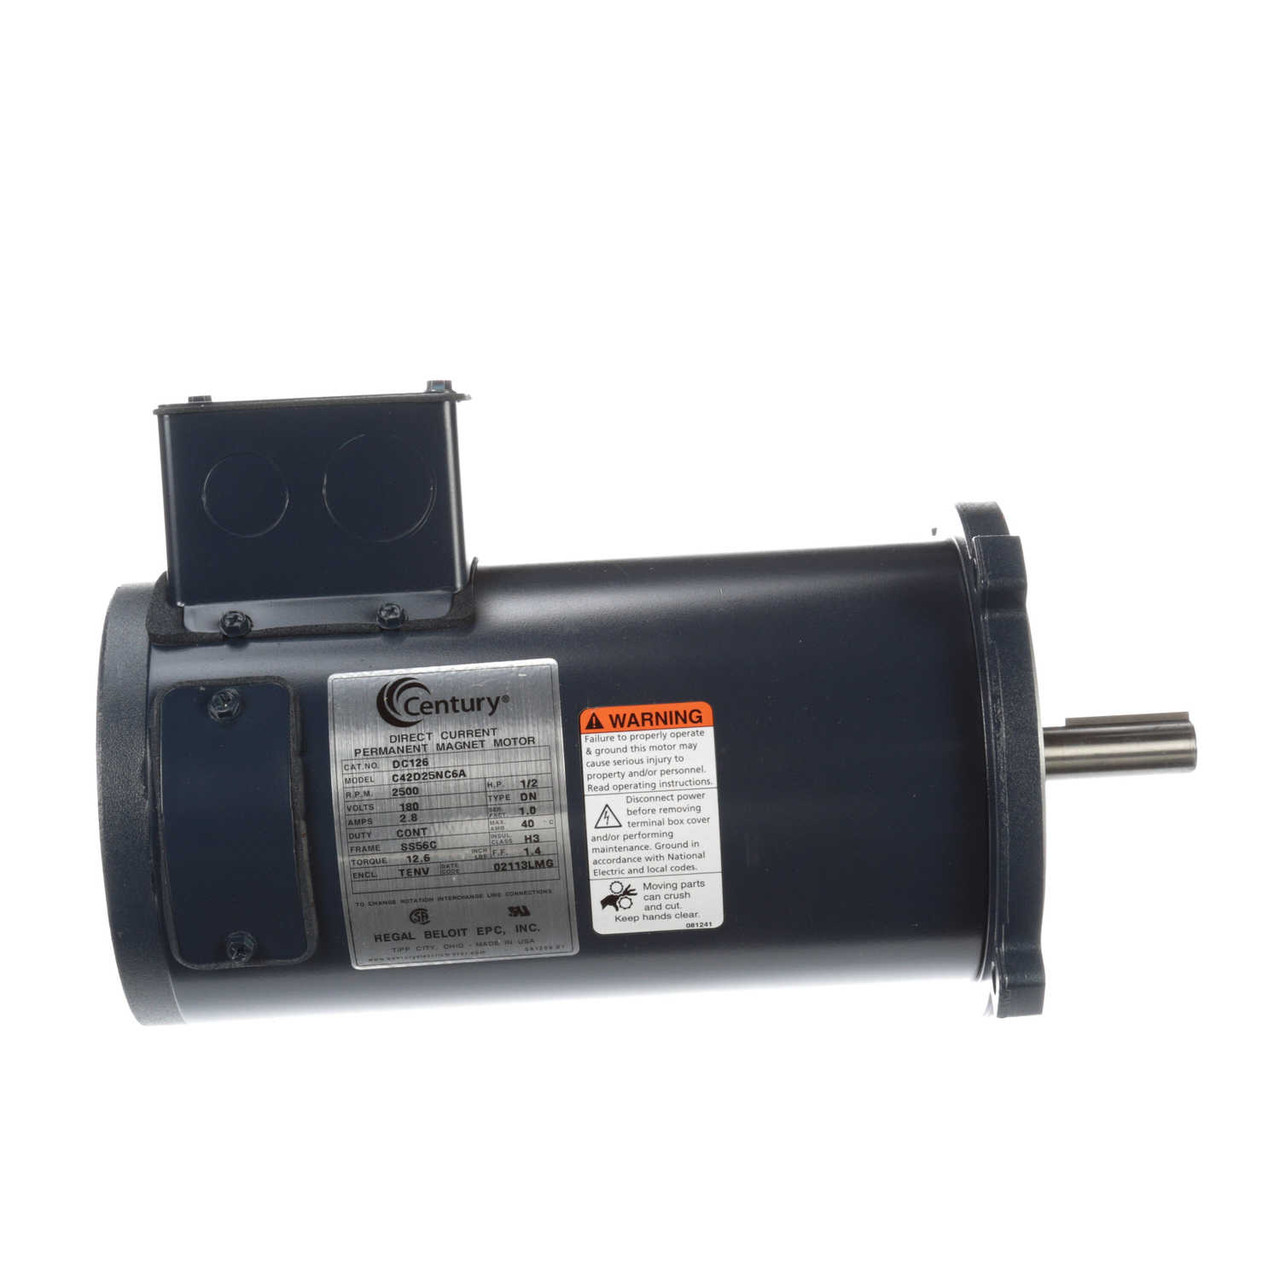 DC126 Permanent Magnet SCR Rated Totally Enclosed C-Face Motor 1/2 HP